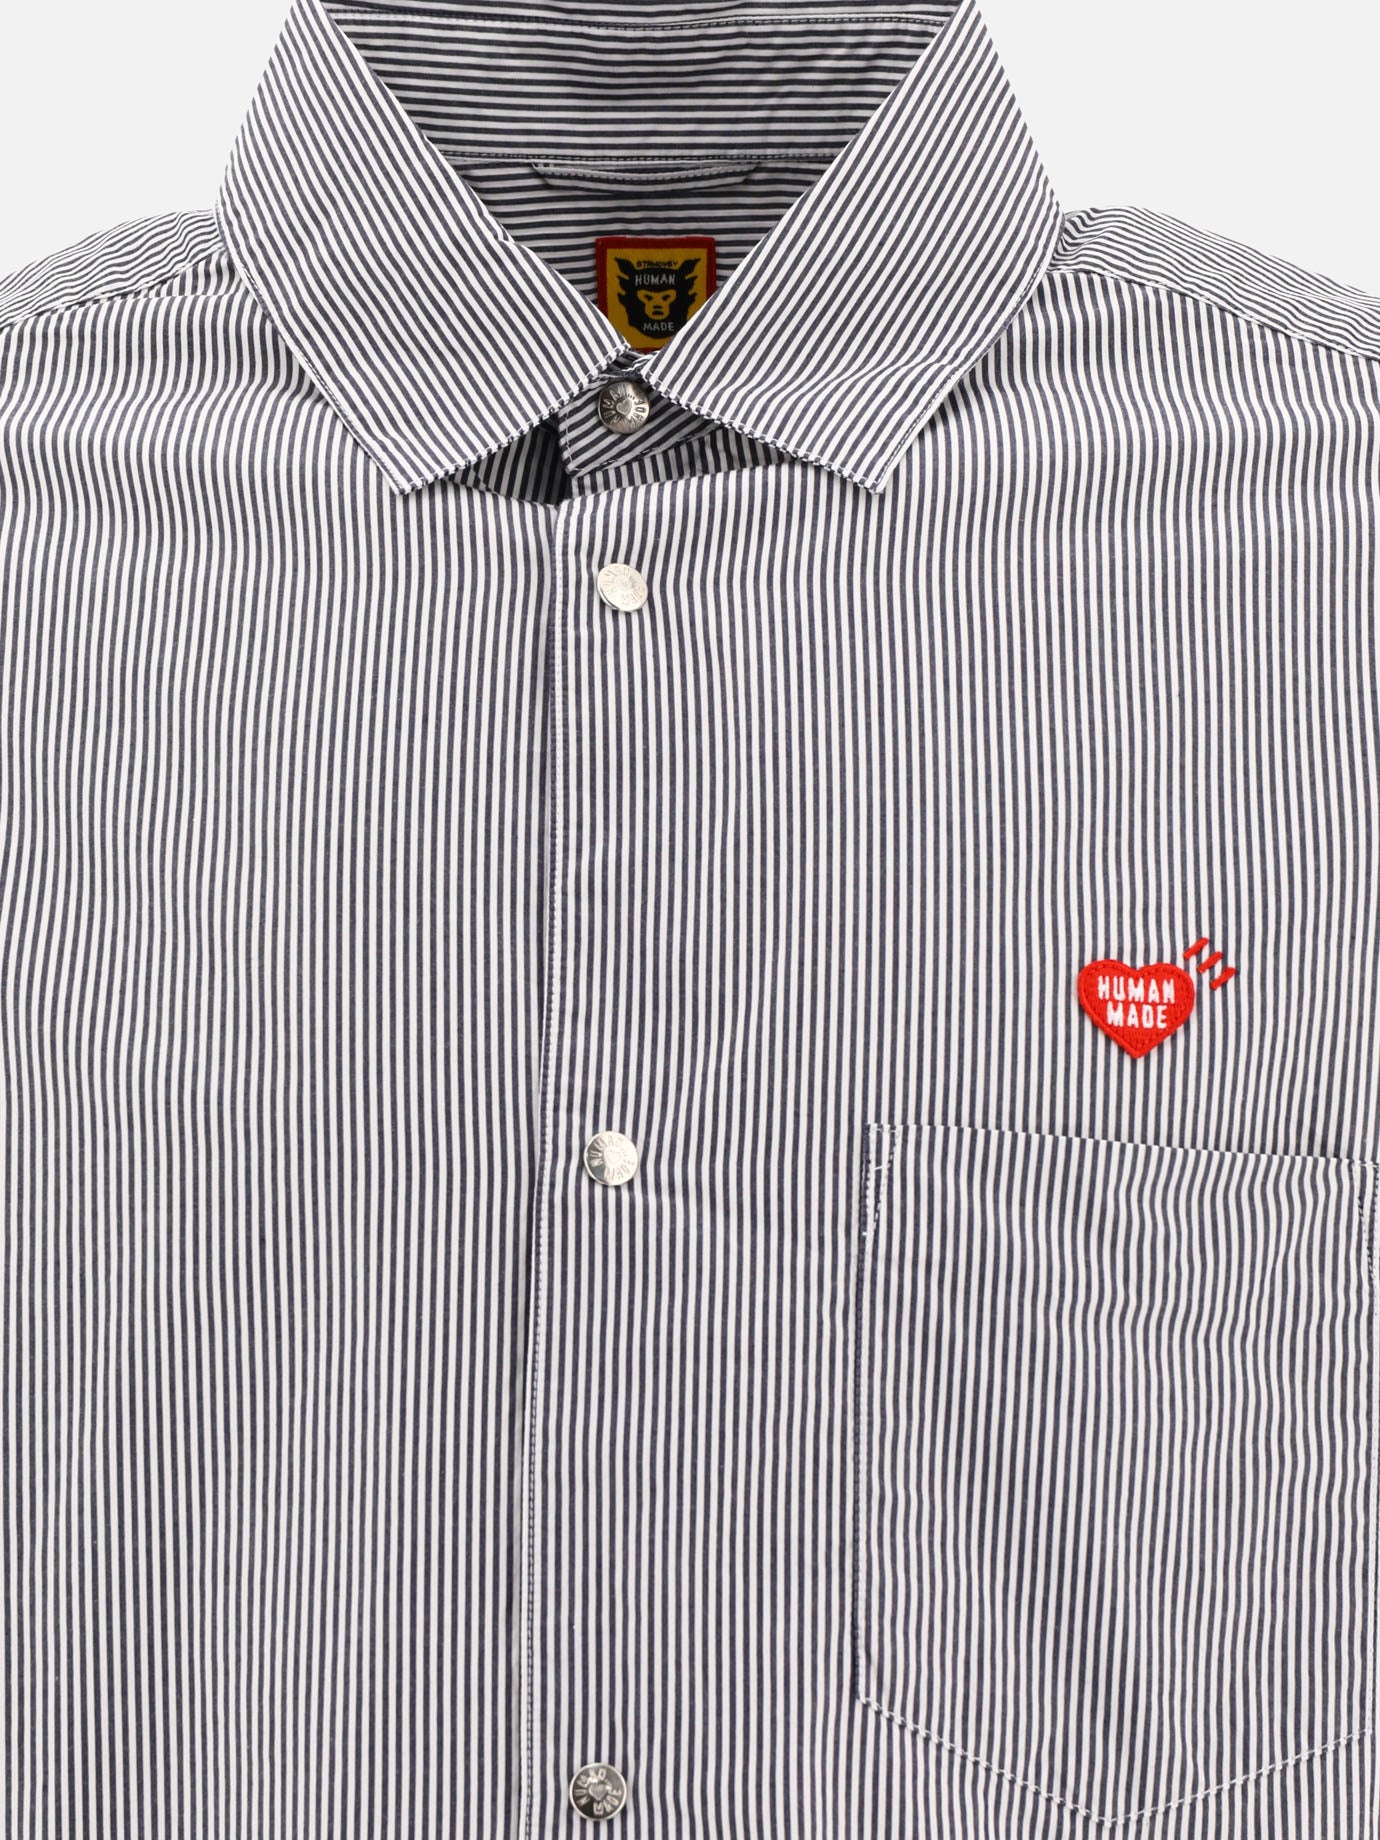 Striped shirt with logo